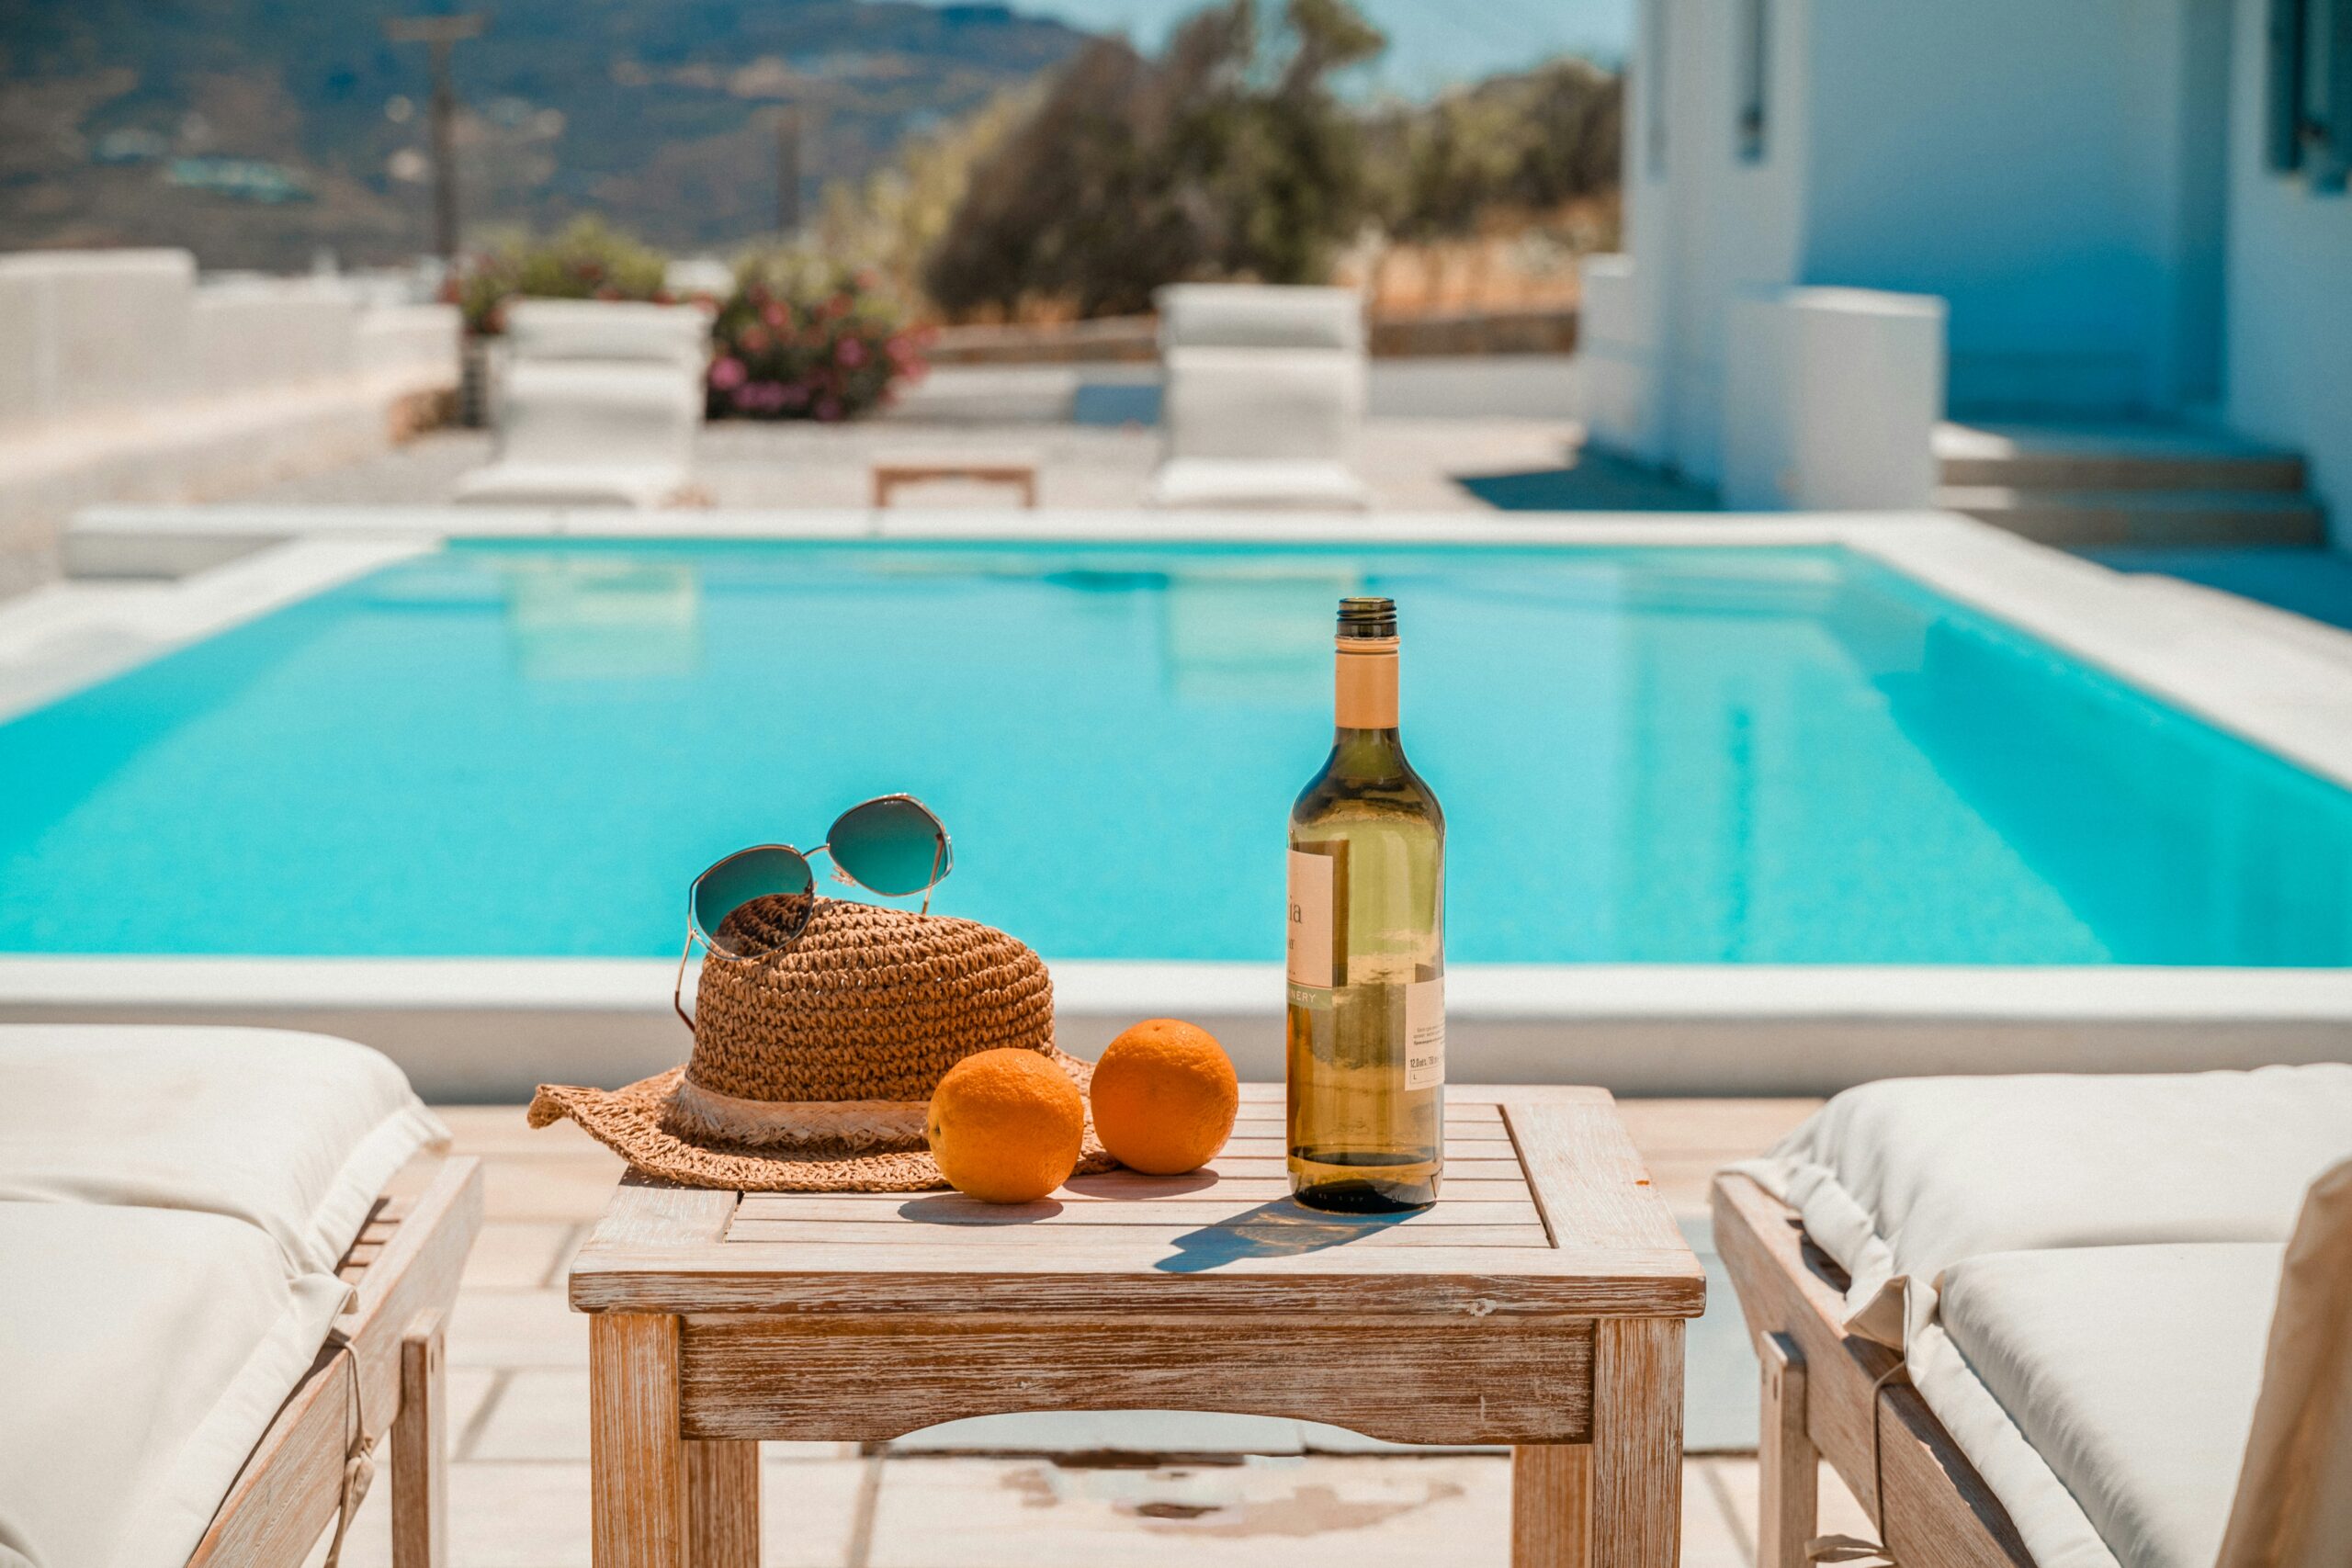 Ready for a refreshing day, a table by the poolside is set with a bottle of wine, oranges, and sunglasses, capturing the essence of a leisurely vacation.